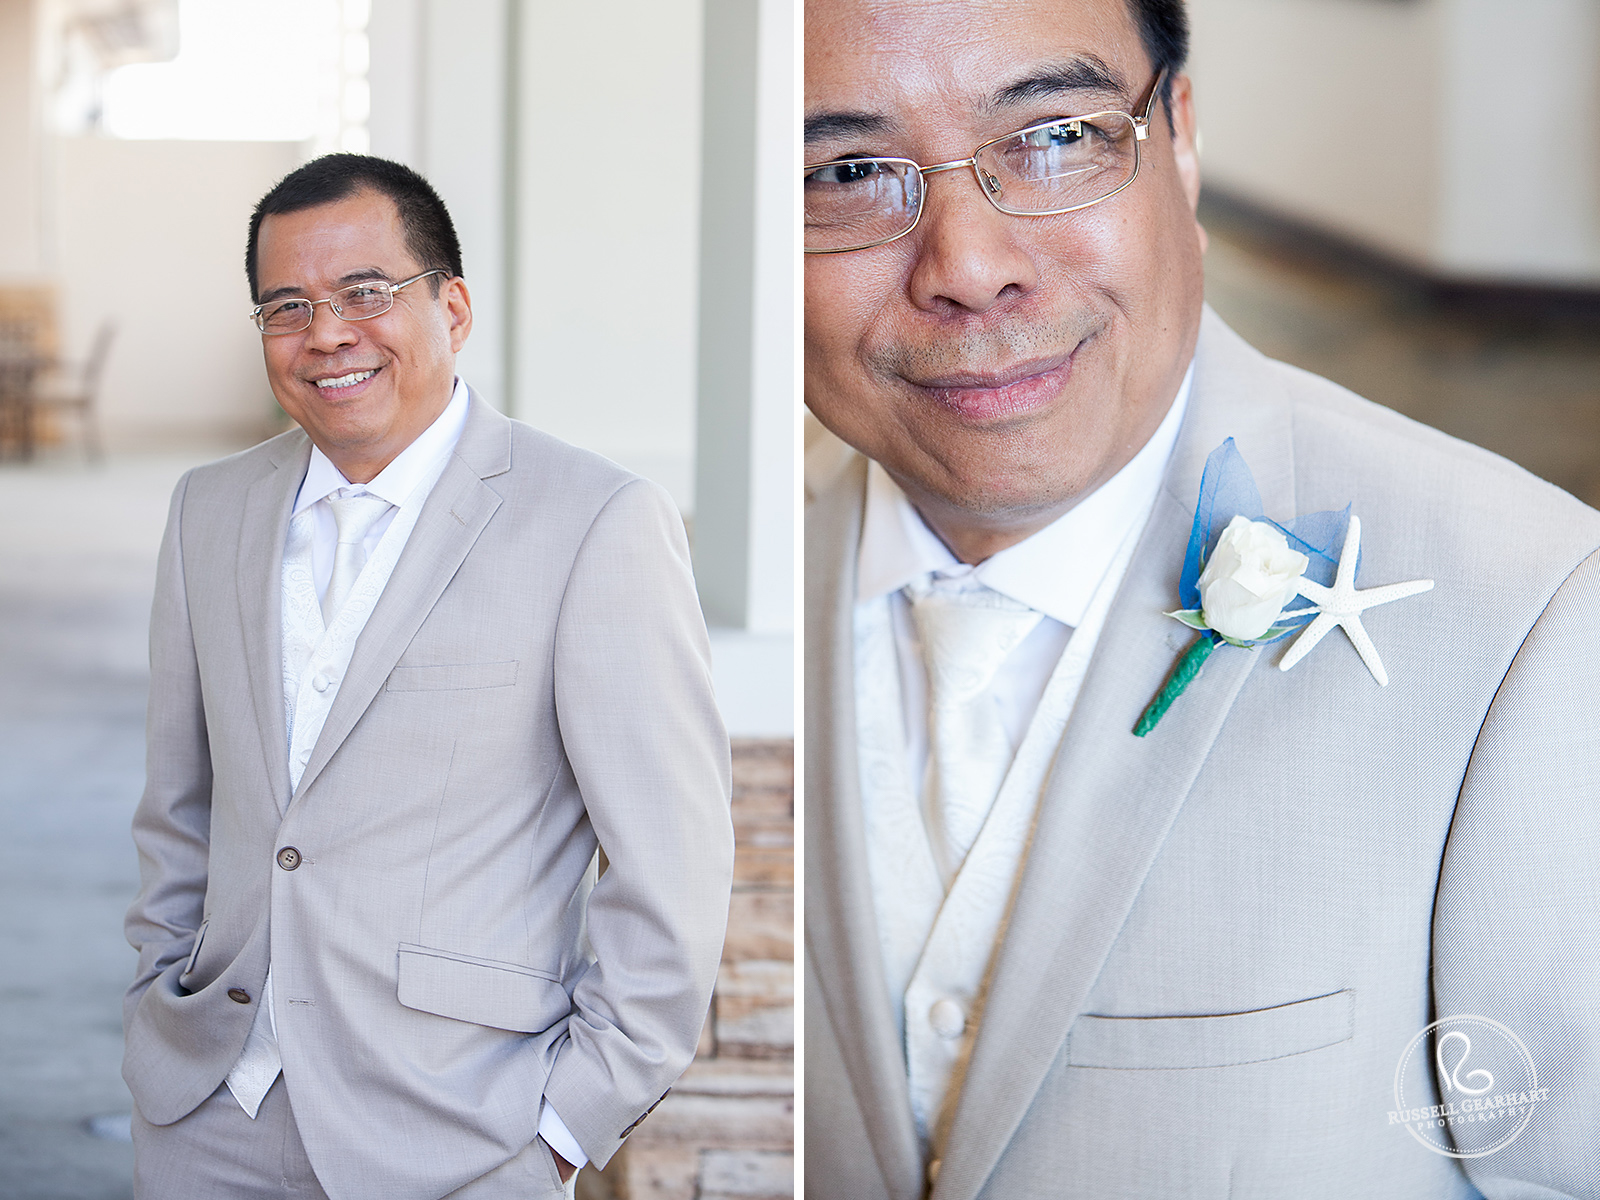 Groom Portrait with Star Fish Boutonniere - Black Gold Golf Club Wedding – Russell Gearhart Photography – www.gearhartphoto.com